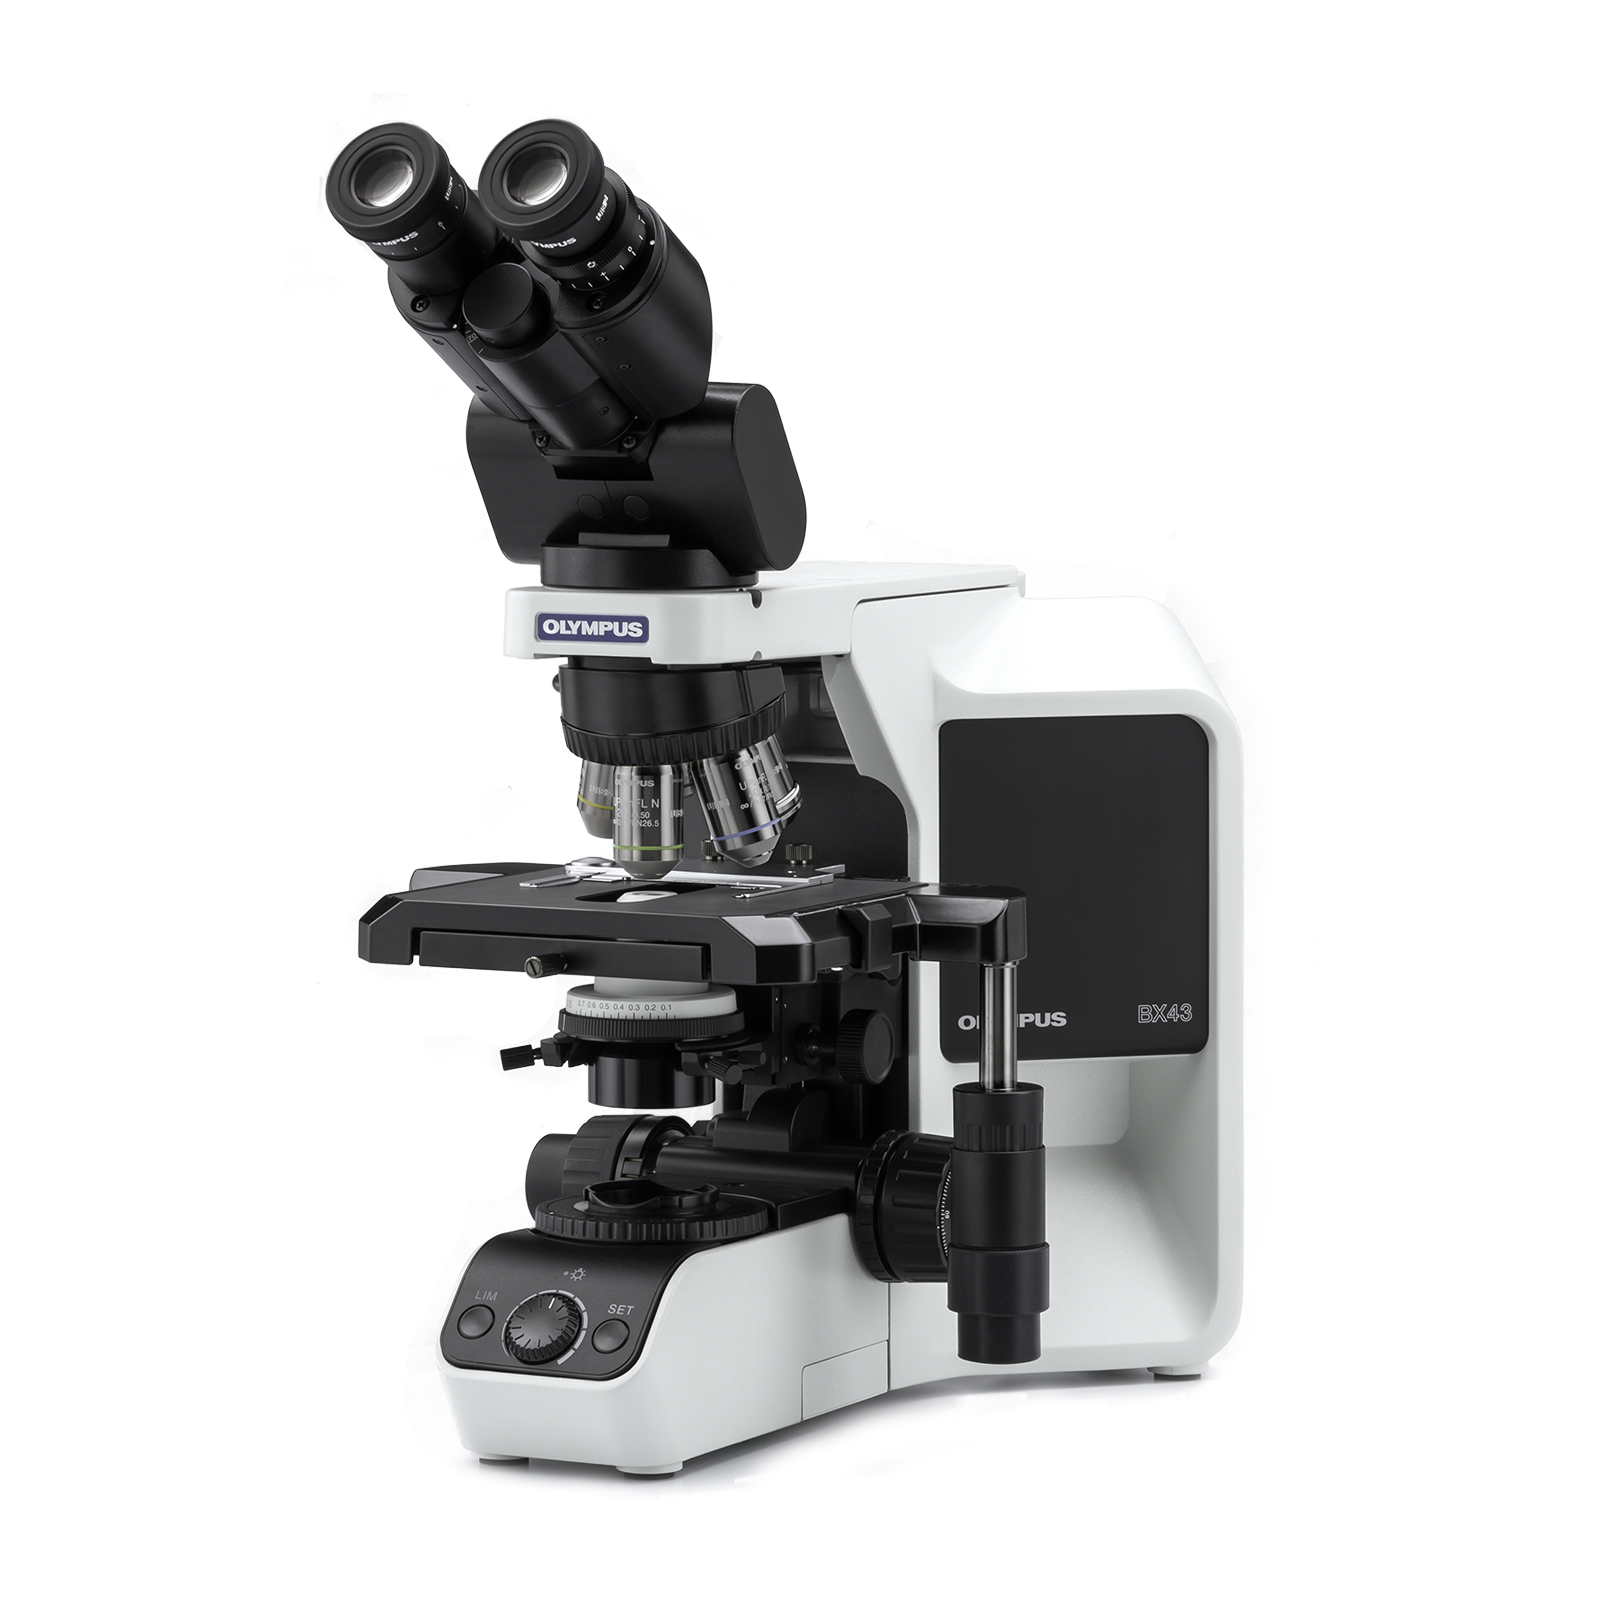 Alliant Healthcare will work in conjunction with Olympus Life Sciences to provide ECAT customers with state-of-the-art microscopes and accessories, as well as other laboratory products.